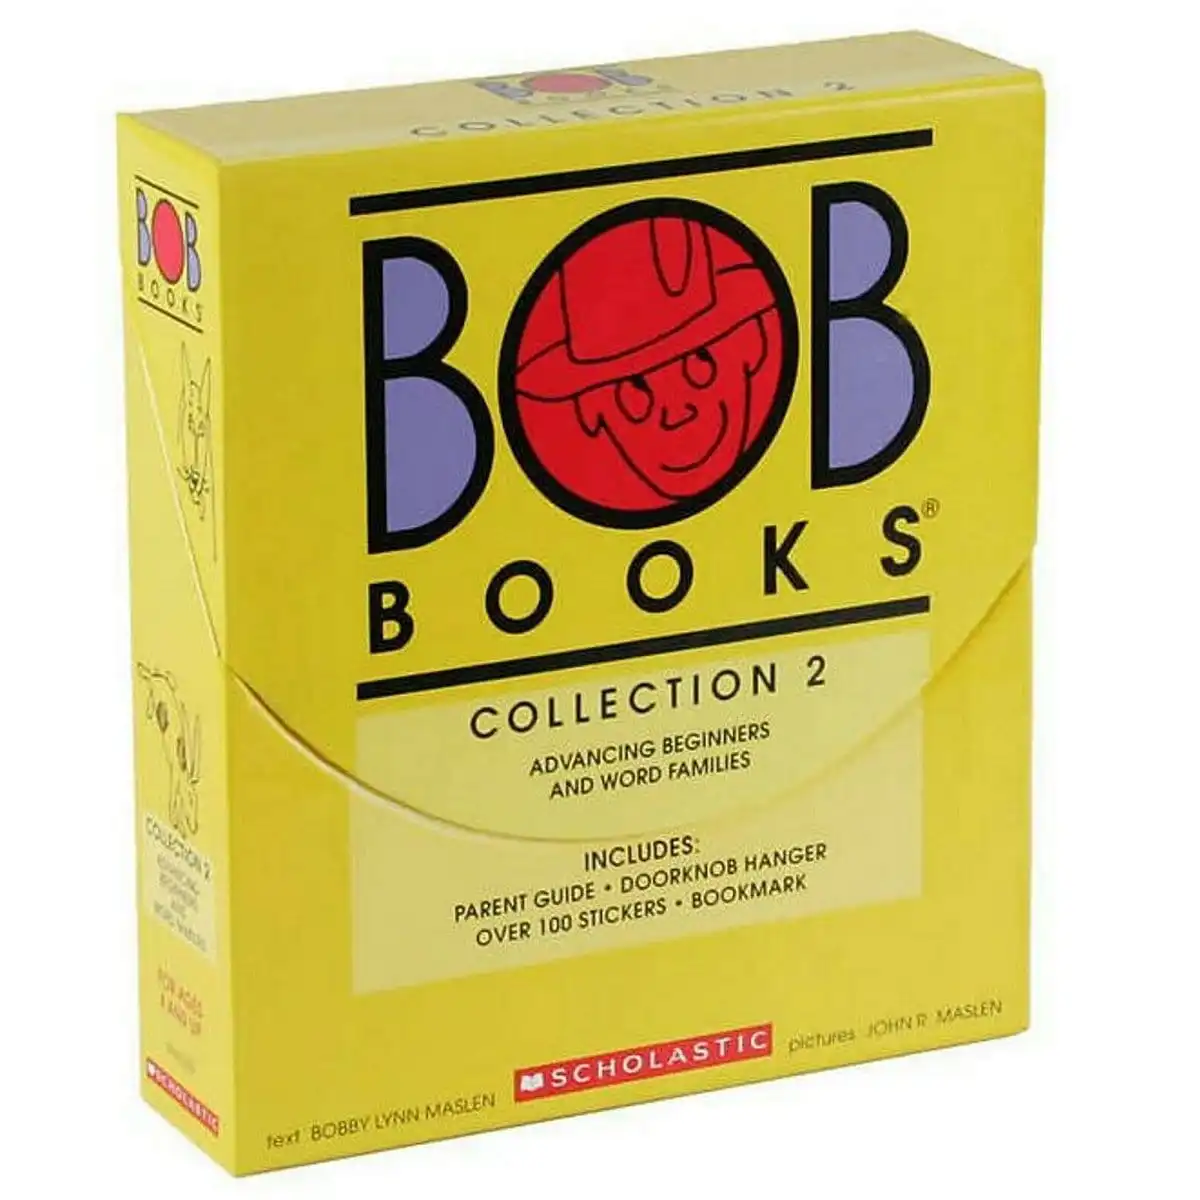 Bob Books: Collection 2 Advancing Beginners and Word Families